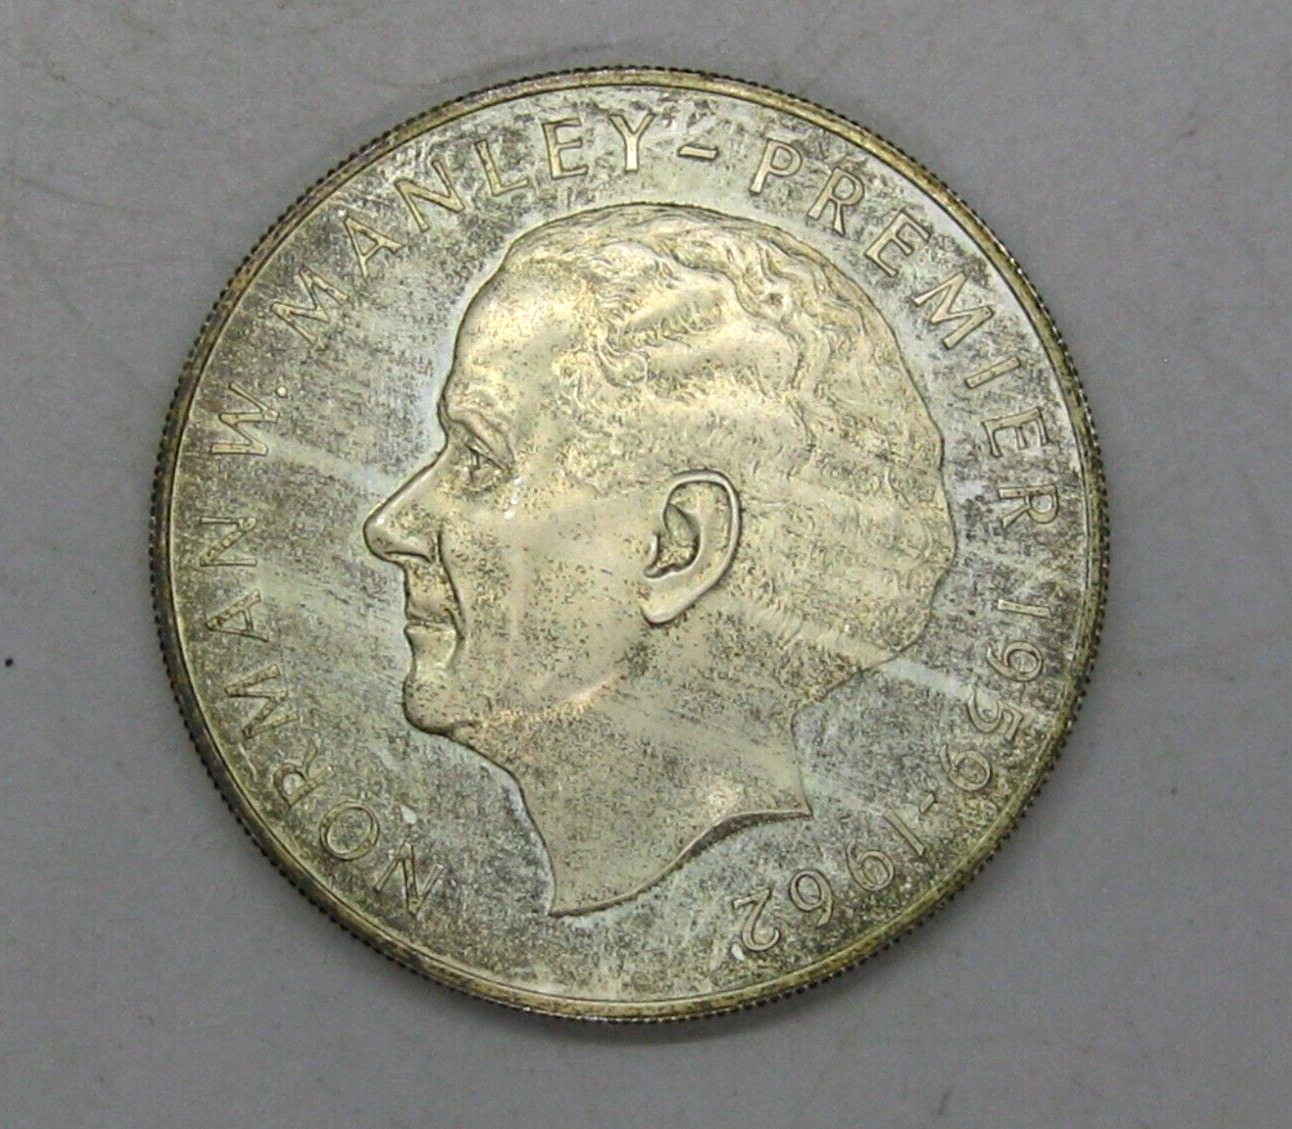 Vtg 1973 Jamaica $5 Dollar Coin .925 Sterling Silver 1.23 ASW w/Toning HUGE